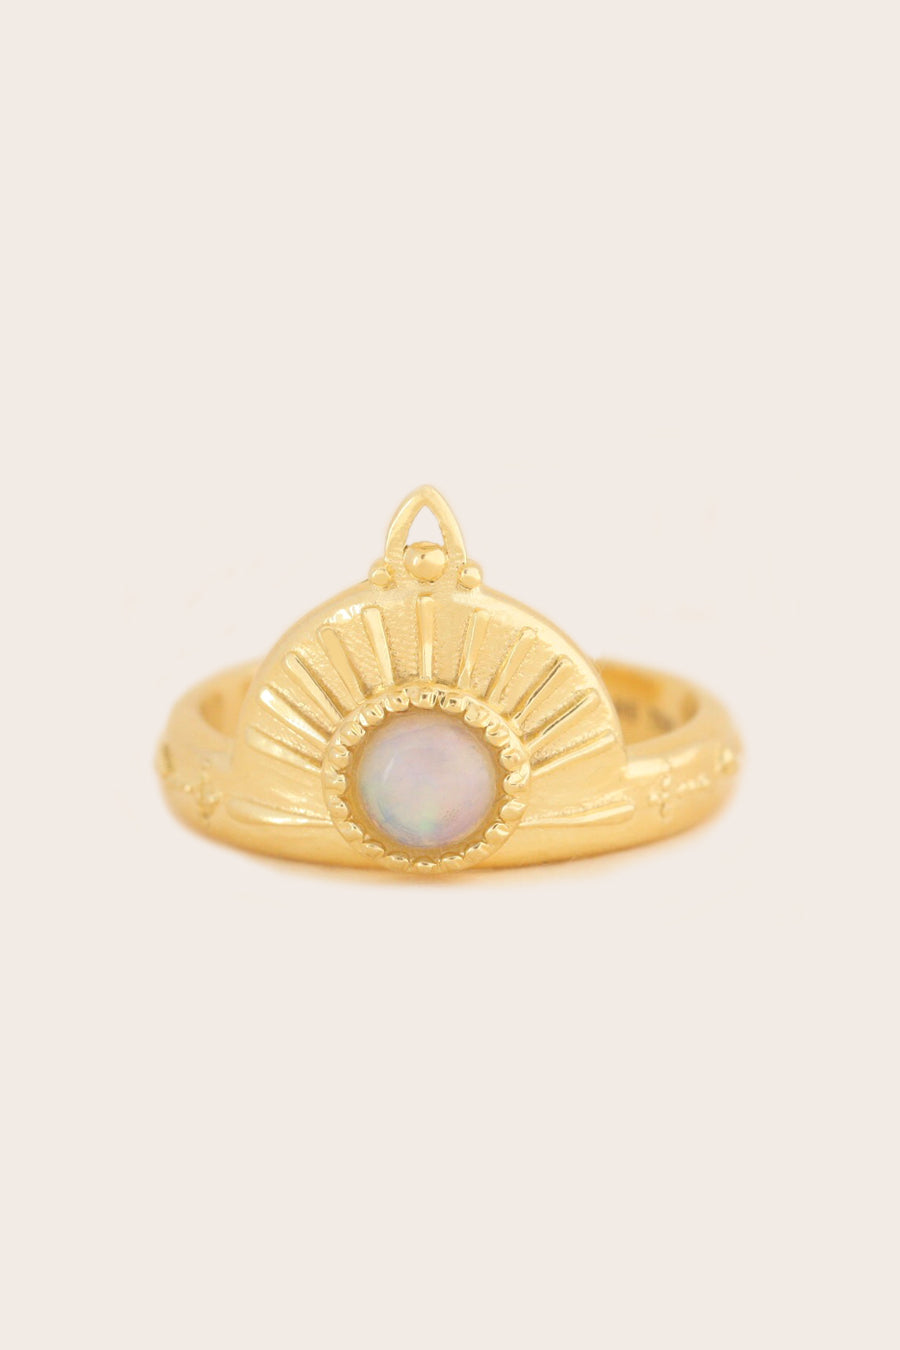 Opal Ring in gold on cream background